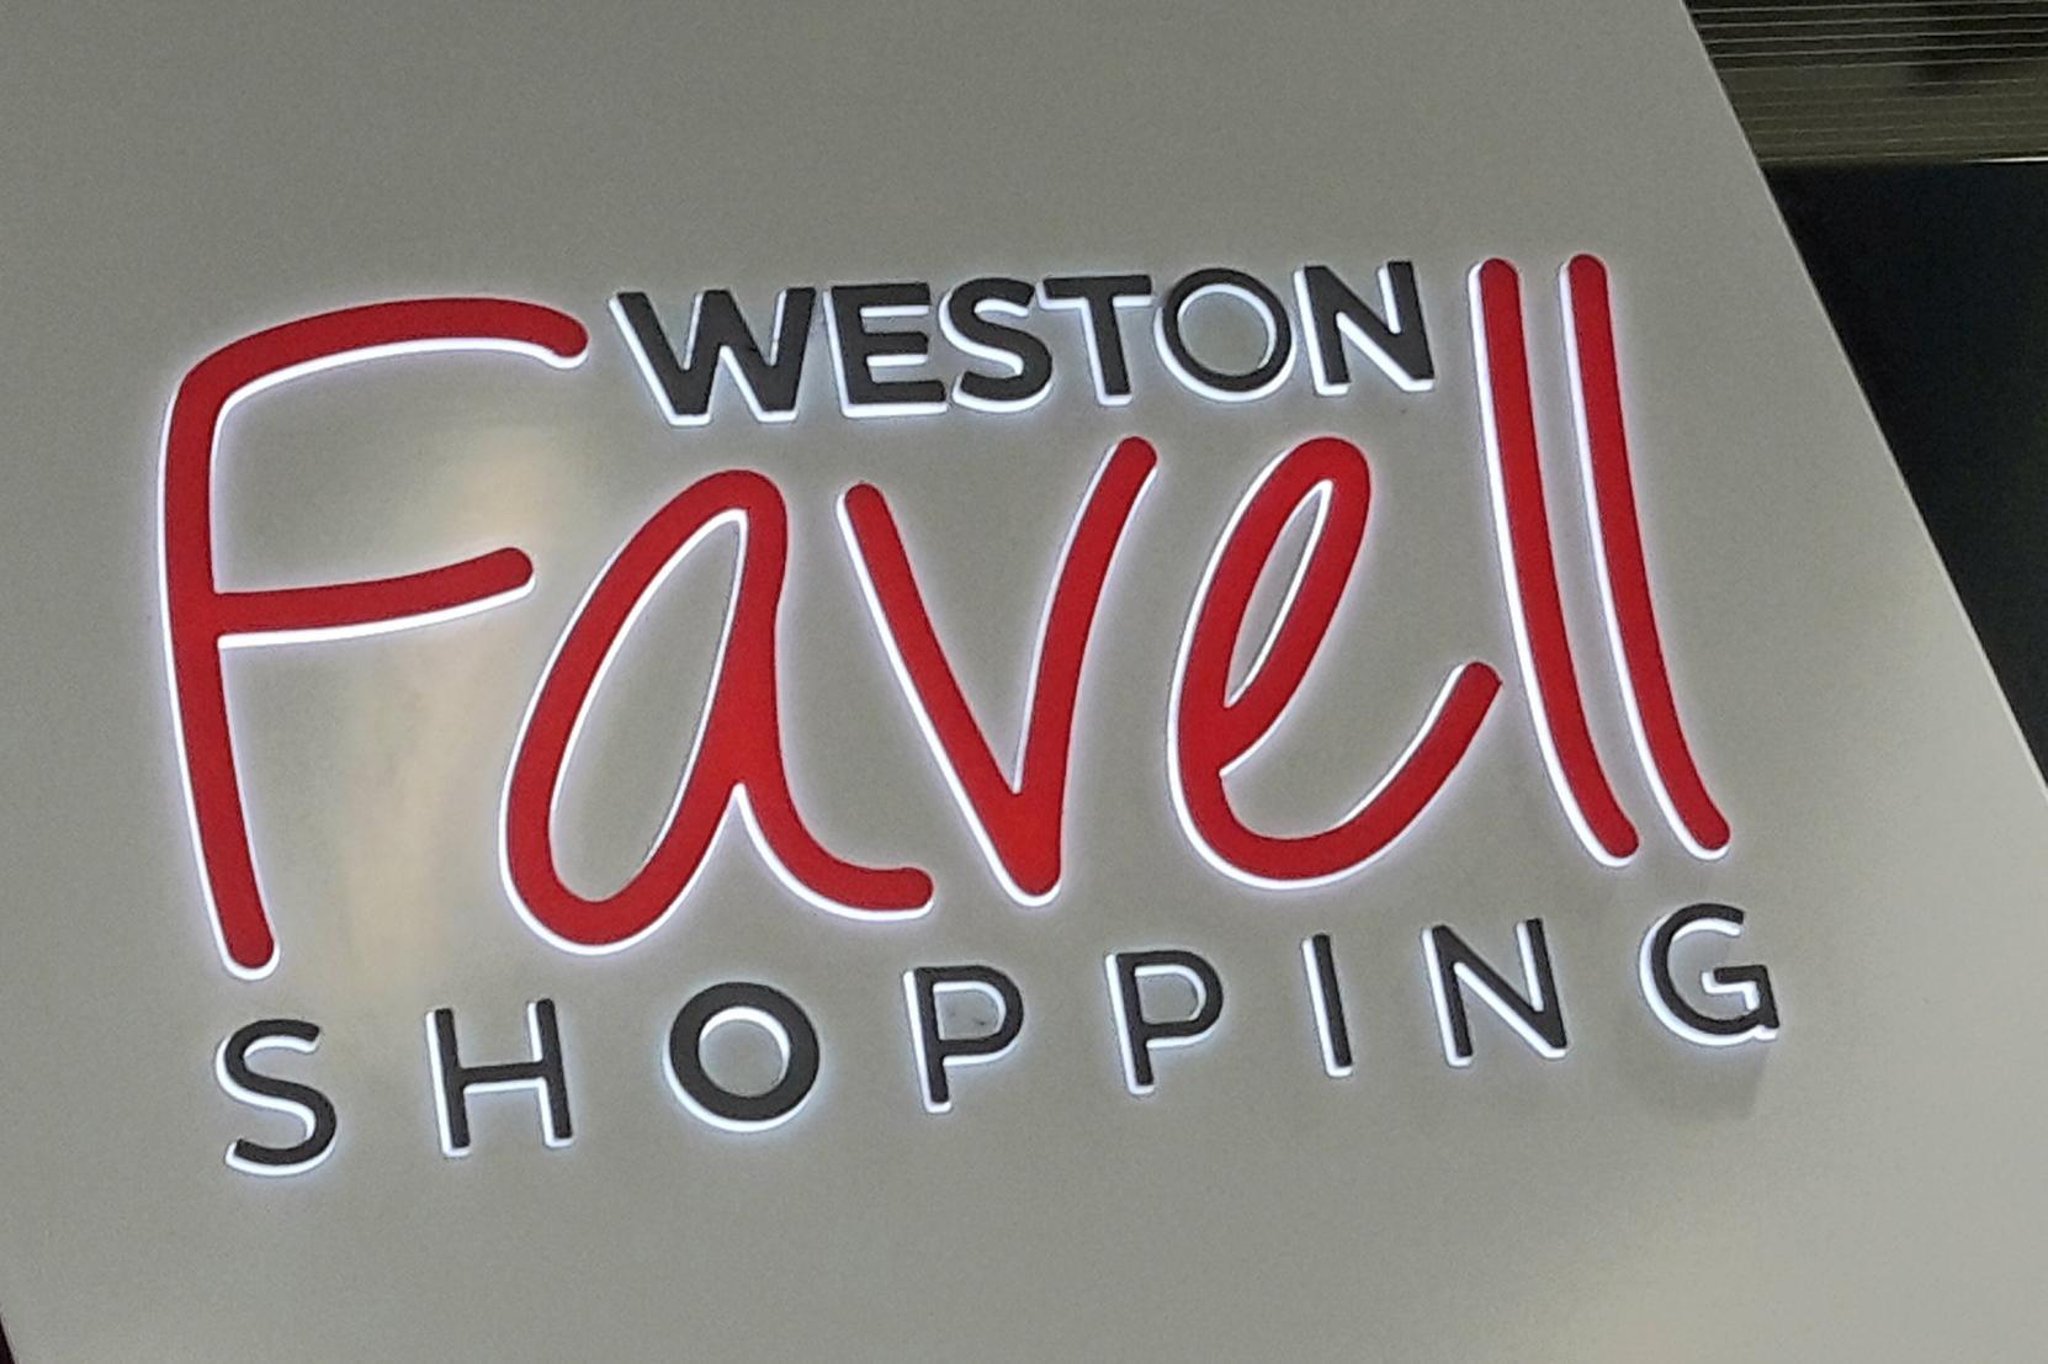 Europe's biggest shoe moves in at Weston Favell Shopping Centre with free footwear for the first 25 customers on Saturday | Northampton Chronicle and Echo